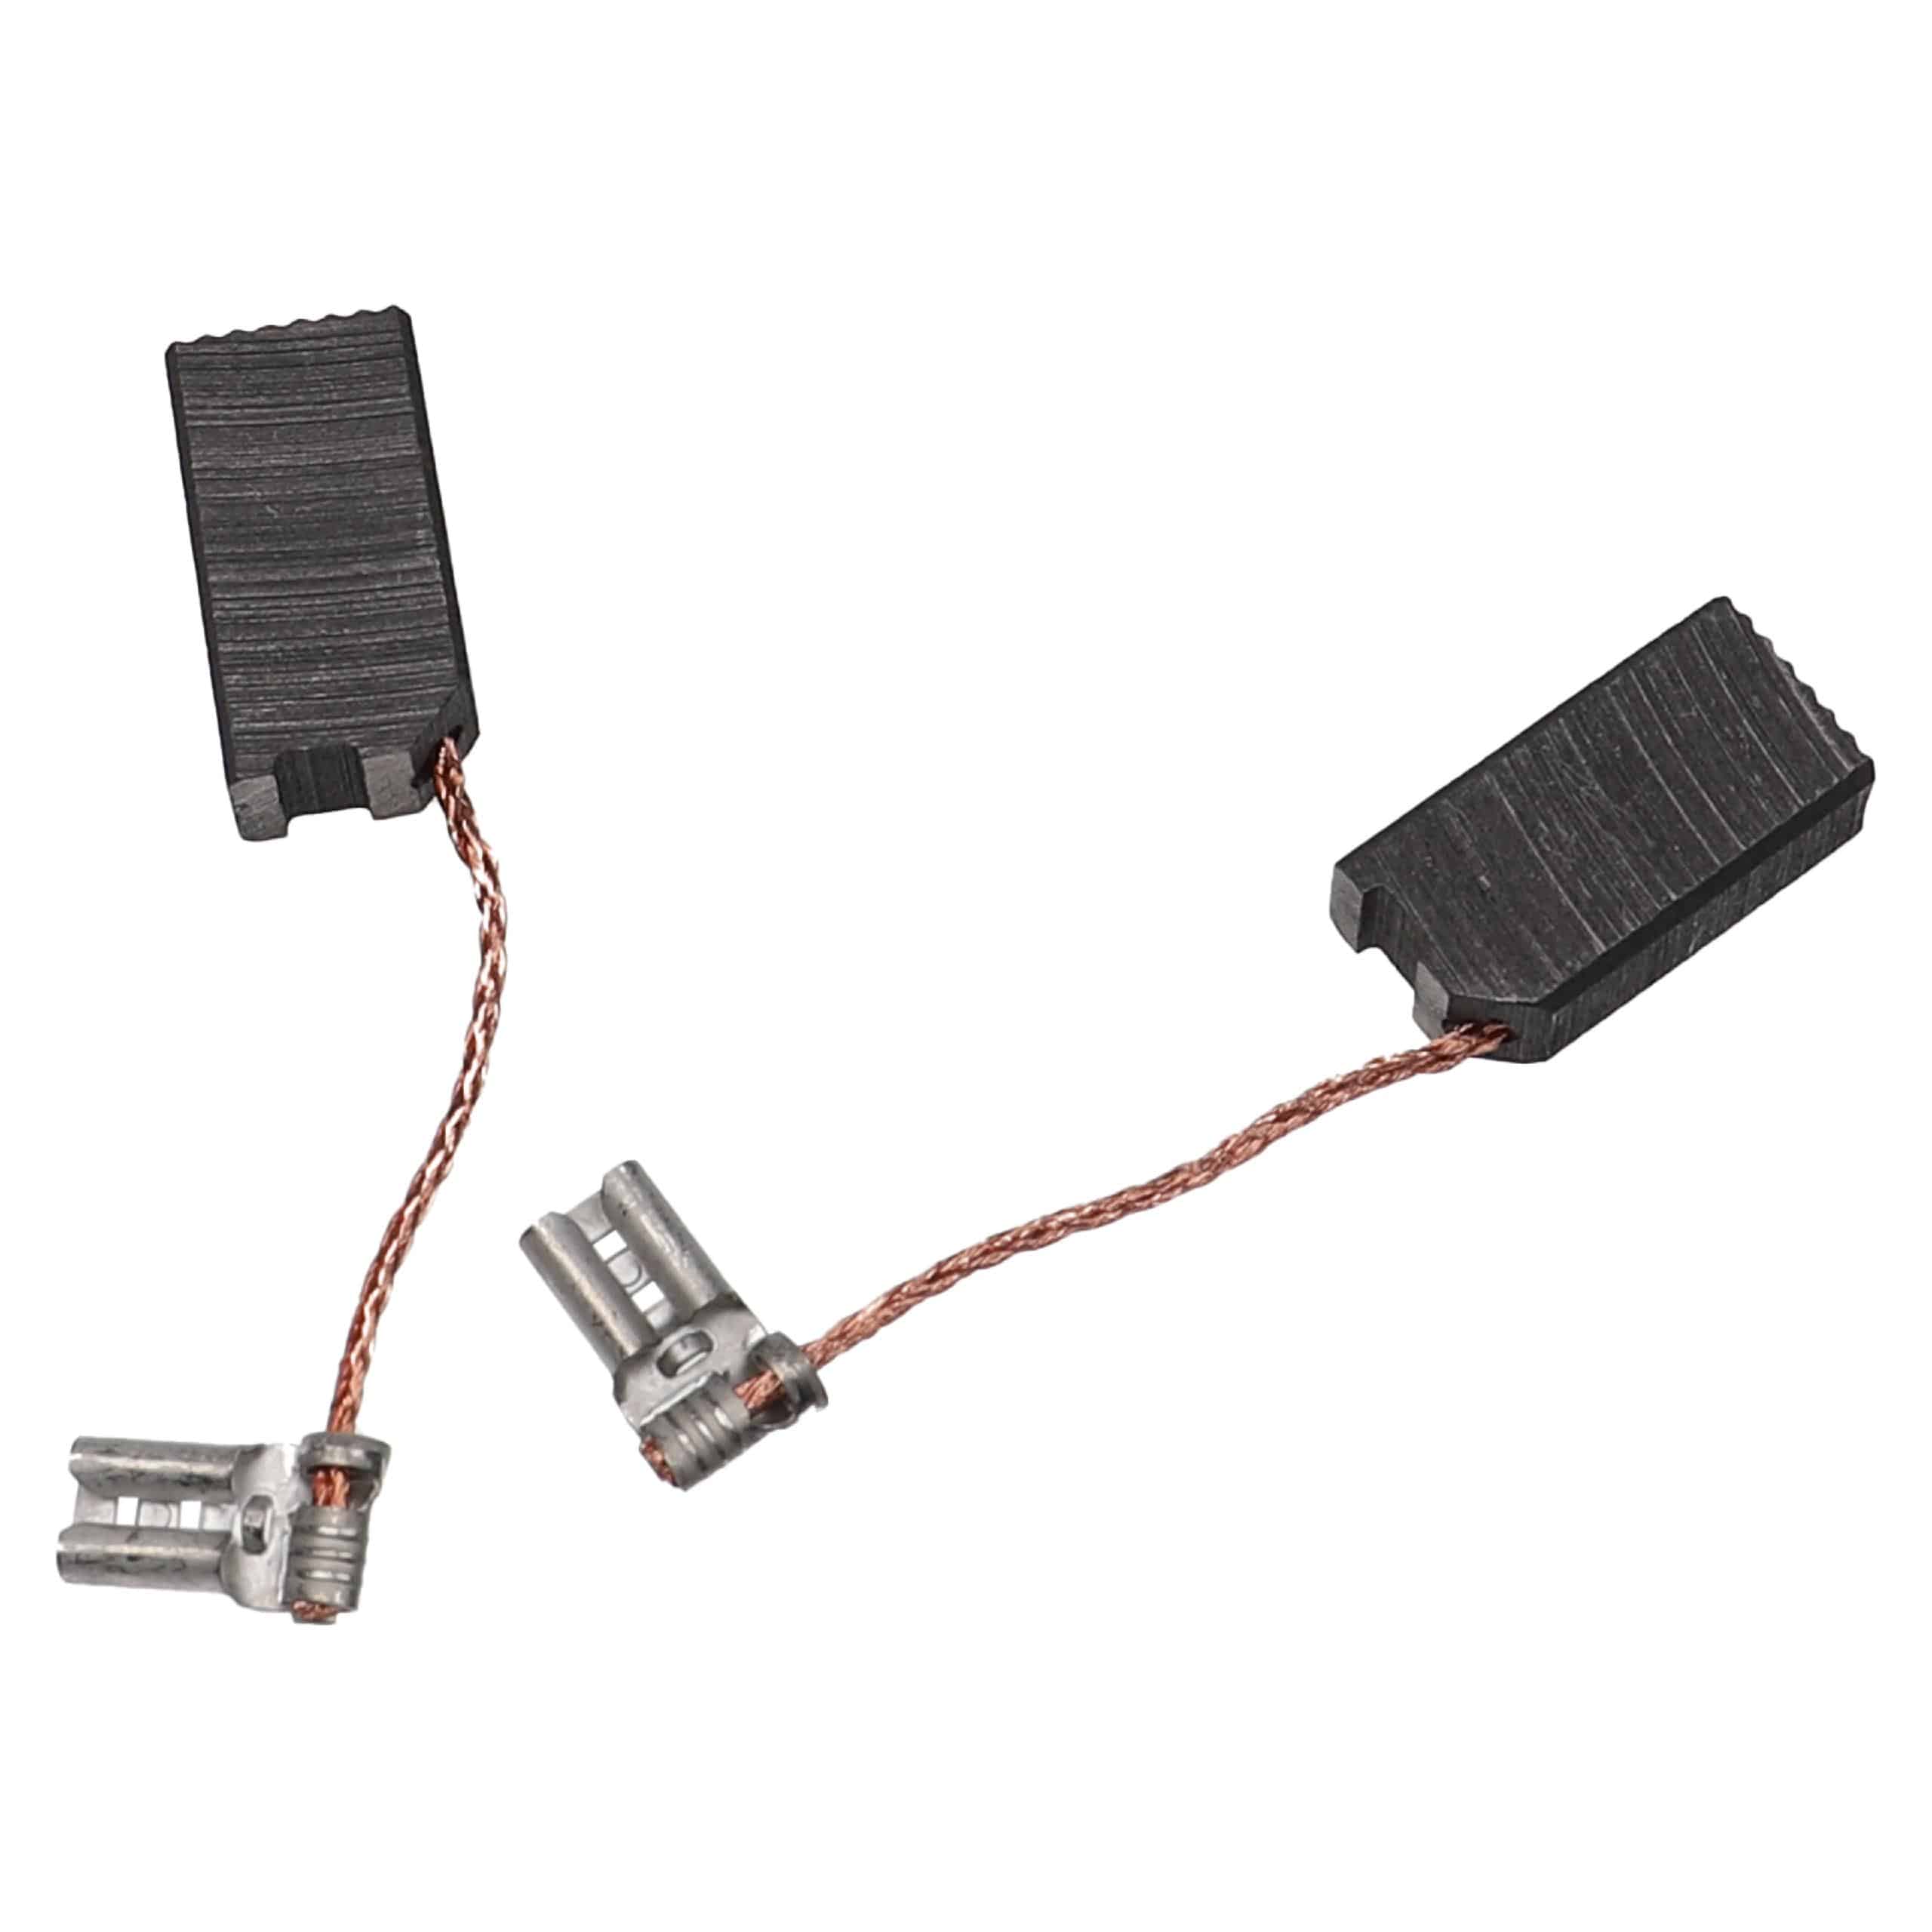 2x Carbon Brush as Replacement for Rothenberger FF56747 Electric Power Tools, 6.3 x 10 x 19mm